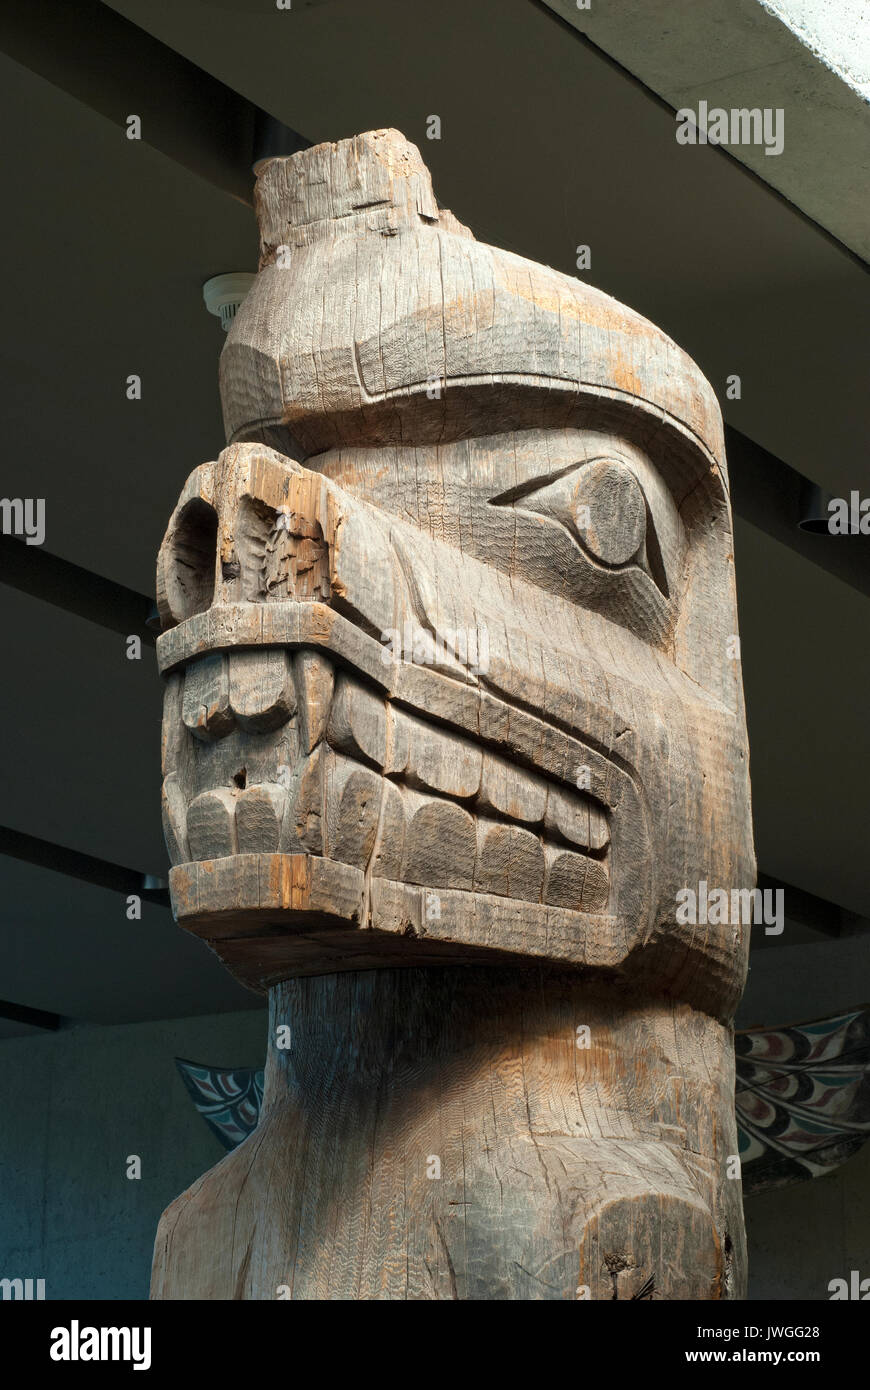 Detail of grizzly bear sculpture carved by Kwakwaka'wakw artist Awalaskanis, Museum of Anthropology, Vancouver, British Columbia, Canada Stock Photo